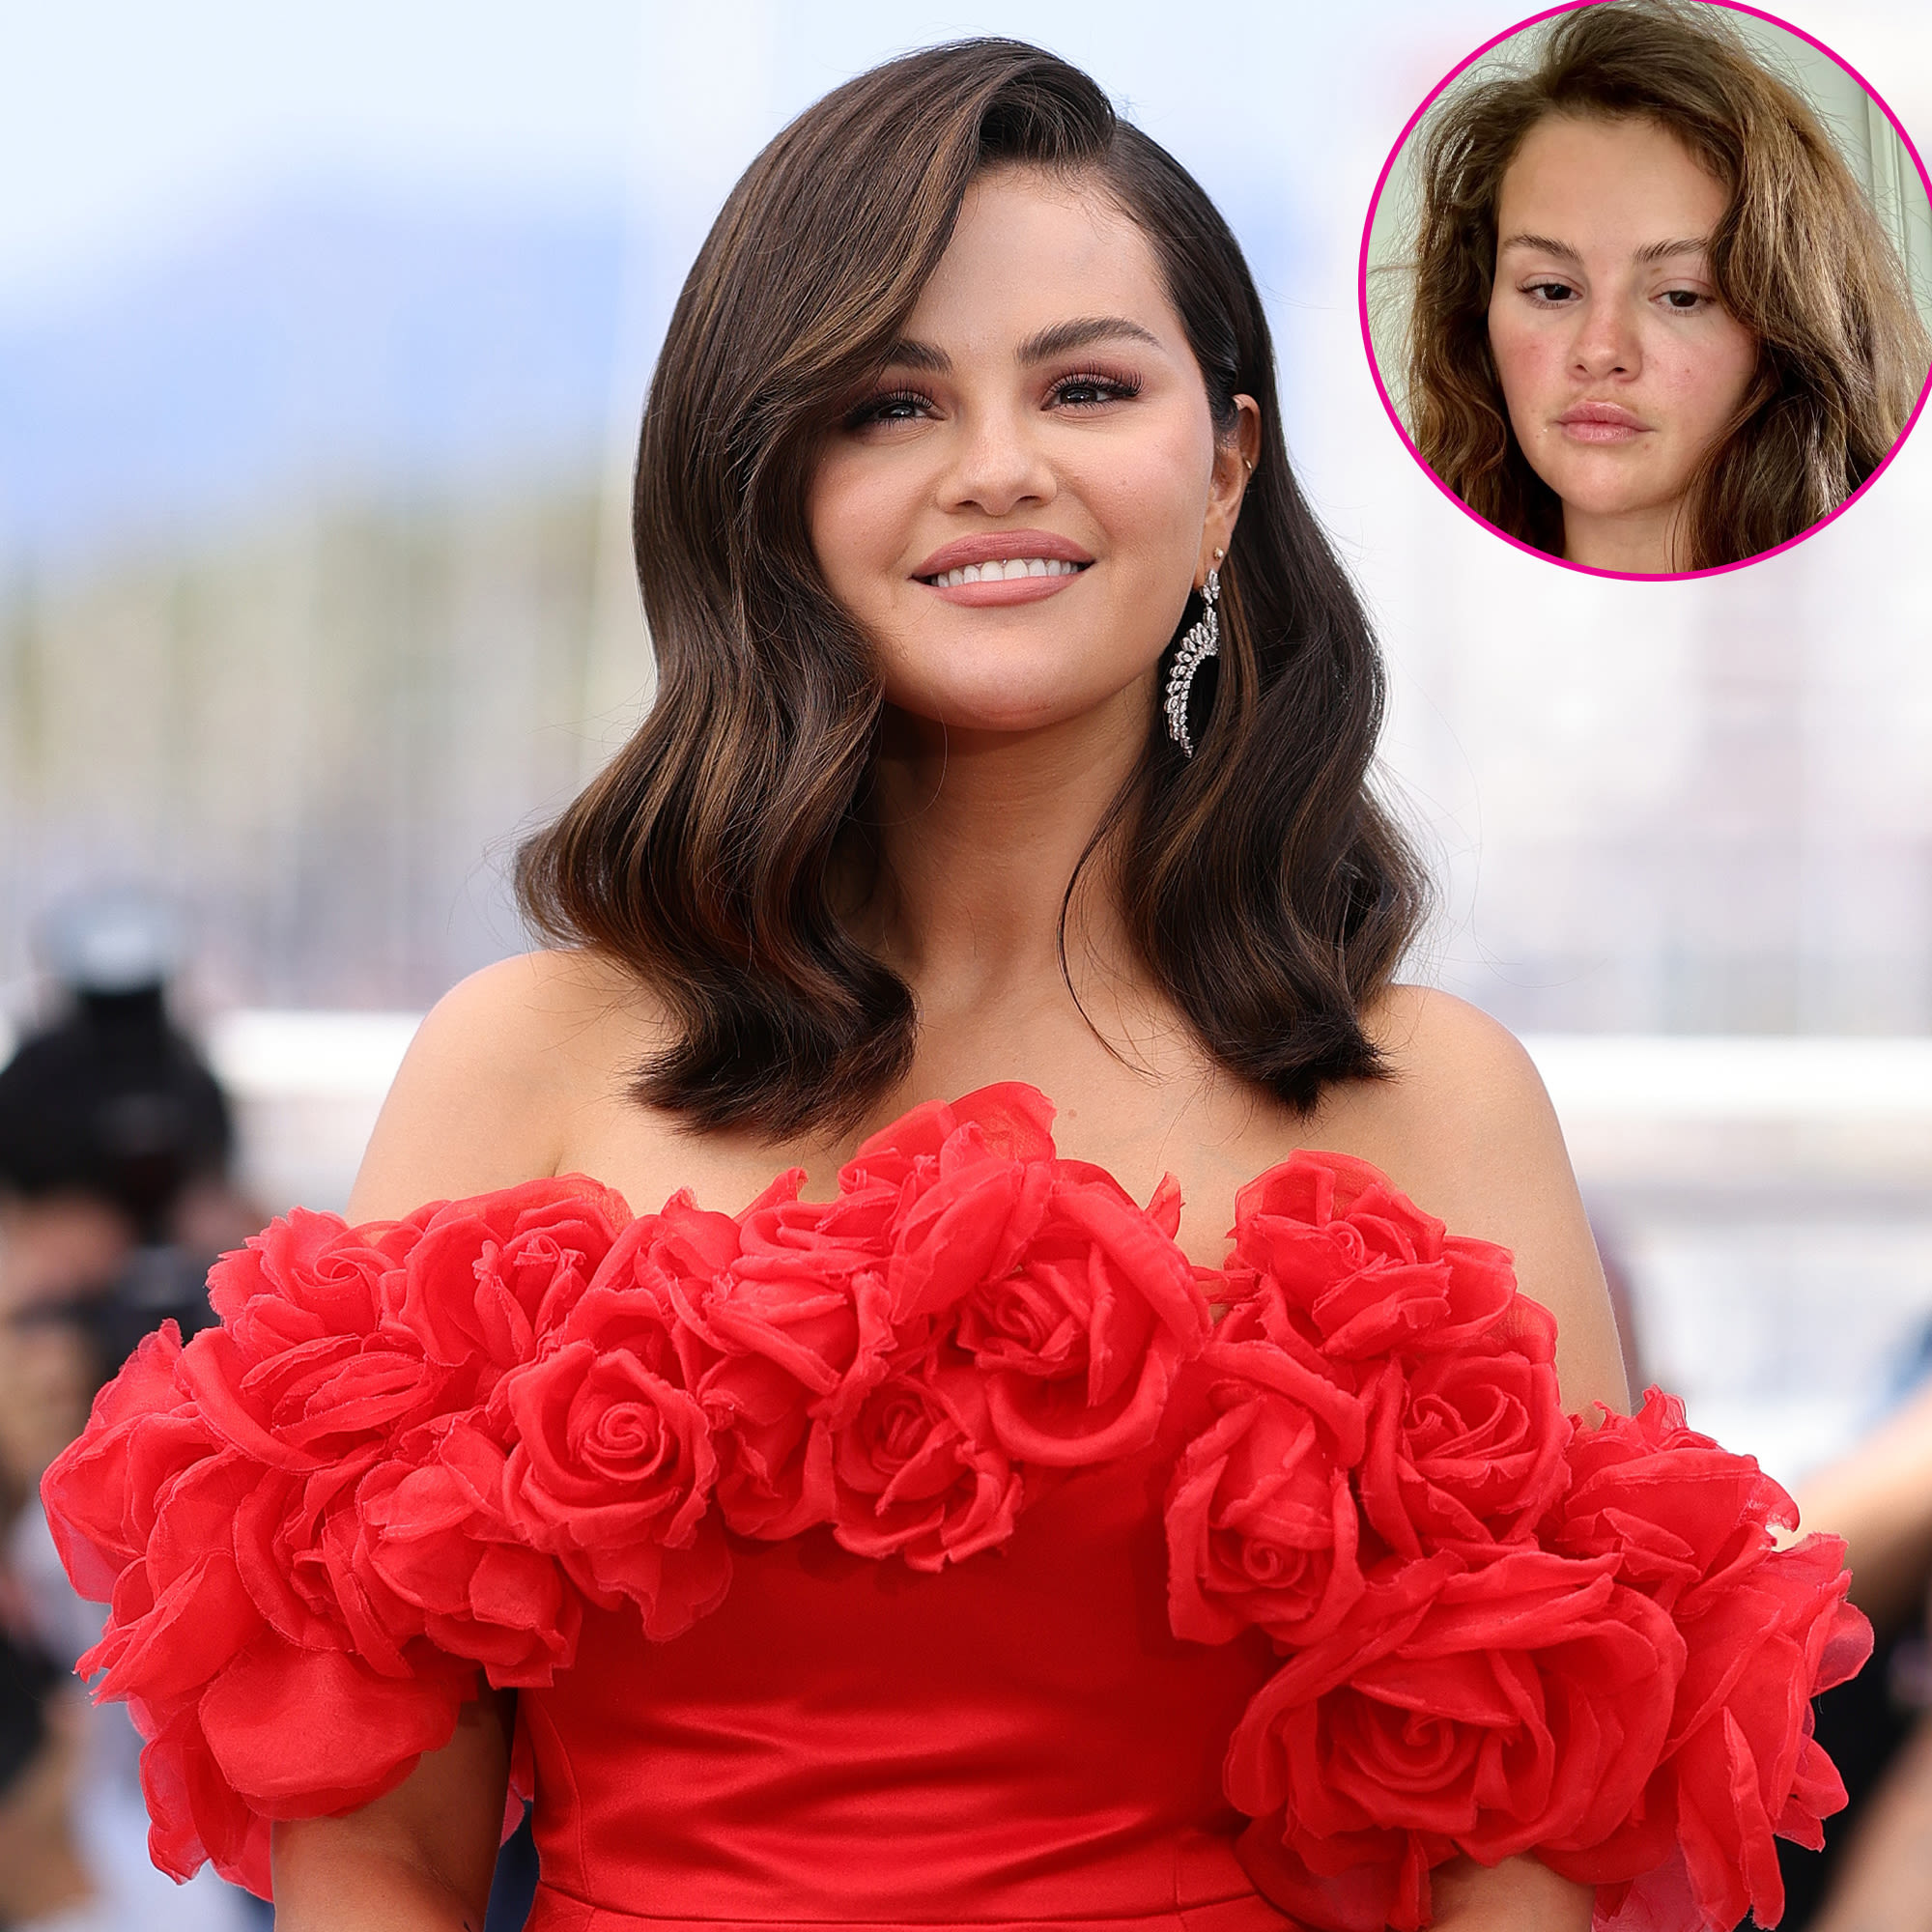 Selena Gomez Is a Rare Beauty in Makeup-Free Selfie While Wearing a ‘B’ Necklace for BF Benny Blanco